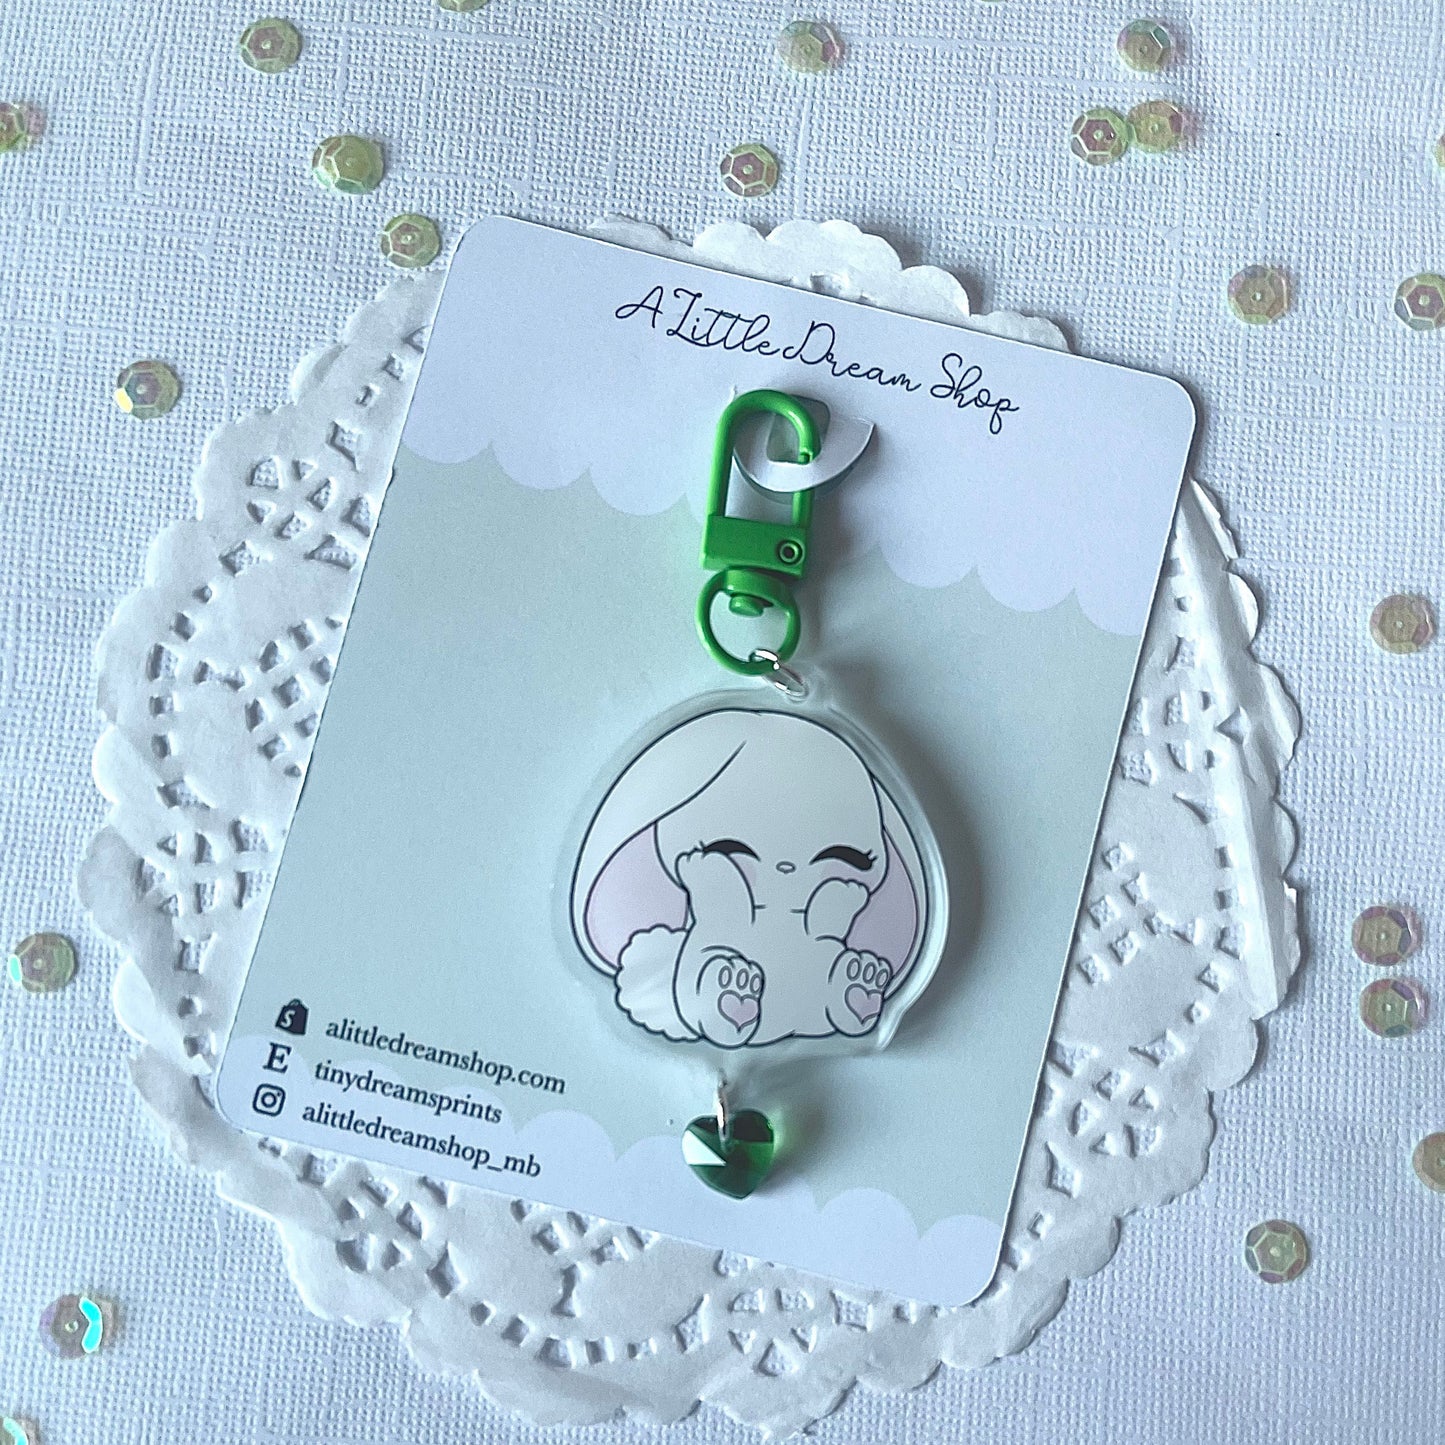 Angèly's Heart - Love Keychain CHOOSE YOUR COLOR!